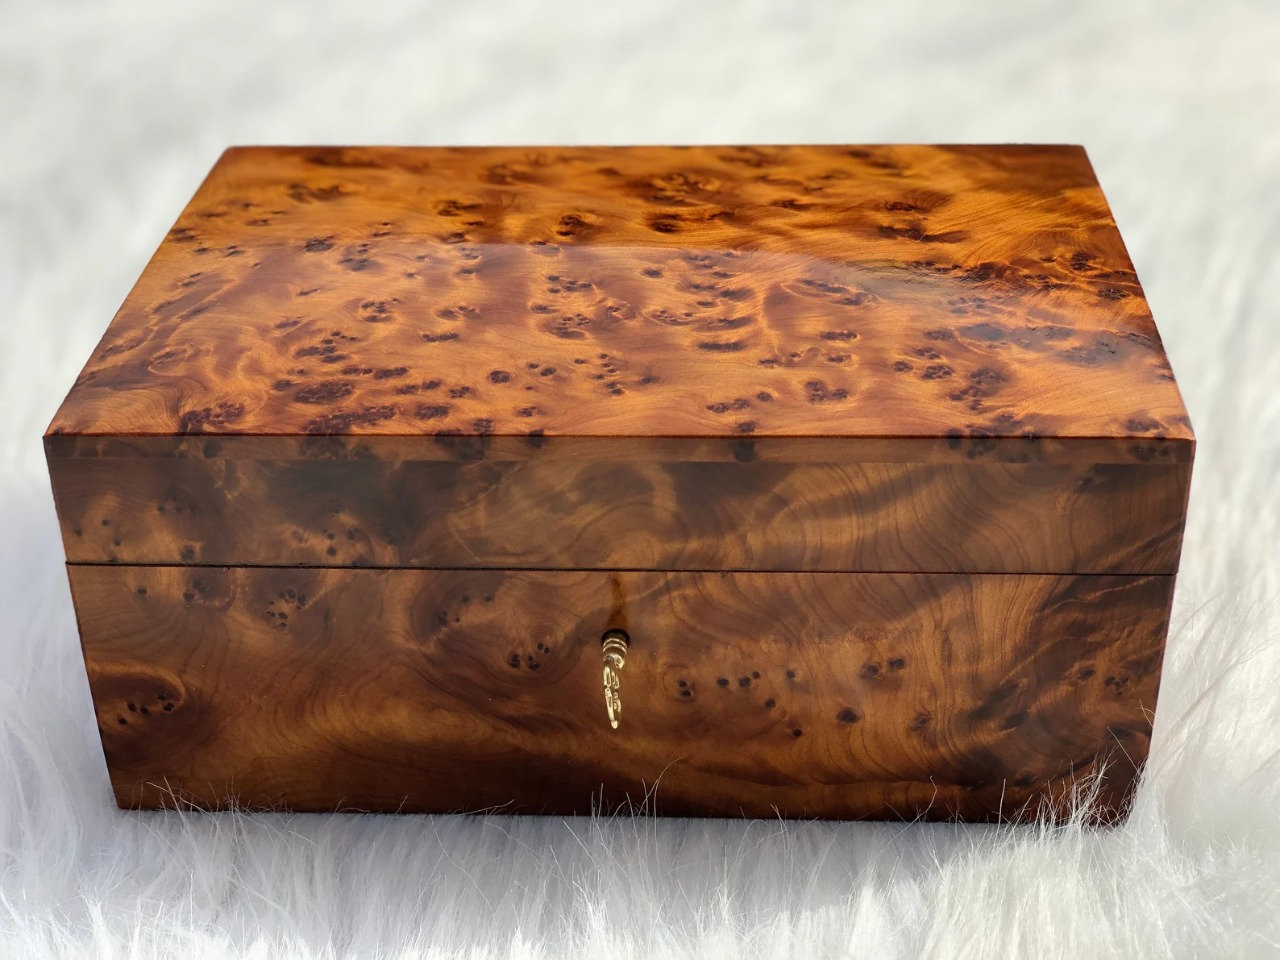 Topincn Wooden Box, Vintage Suitcase Lockable Box Vintage Wooden Storage Box Decorative Jewelry Box With Lock For Home Large 32 X 23.5 X 11.5 Cm 6282